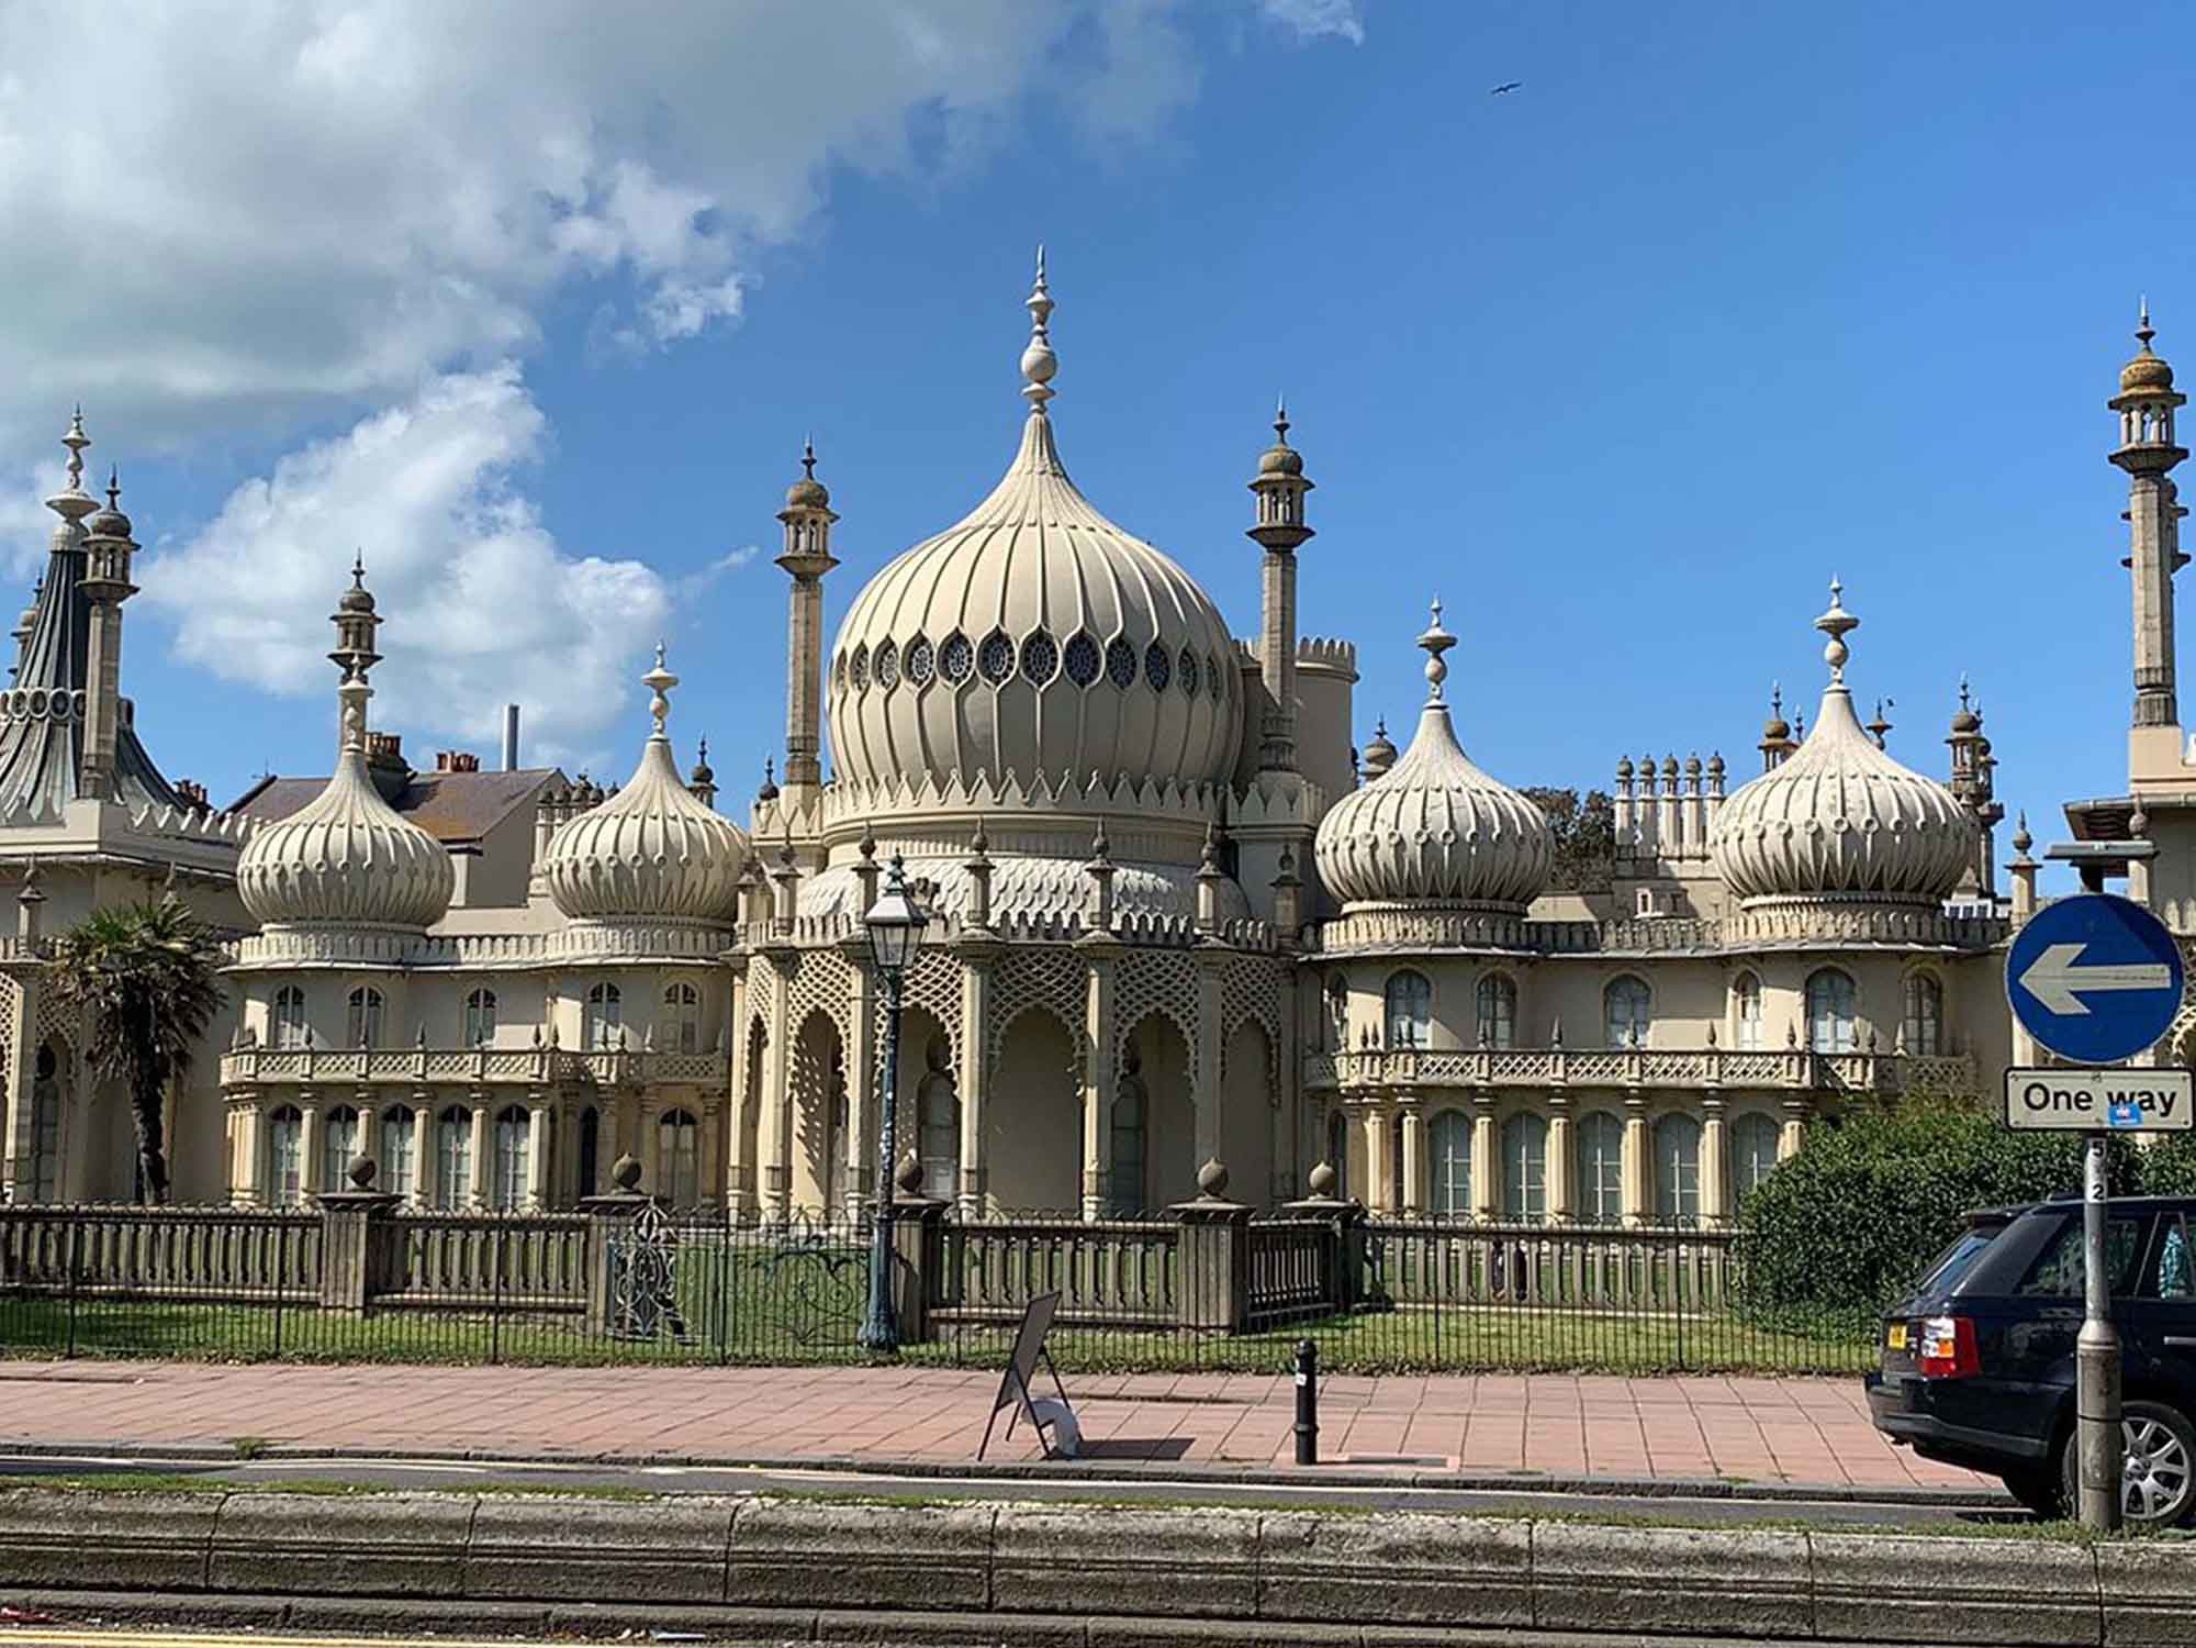 Things To Do in Brighton - Royal Pavilion